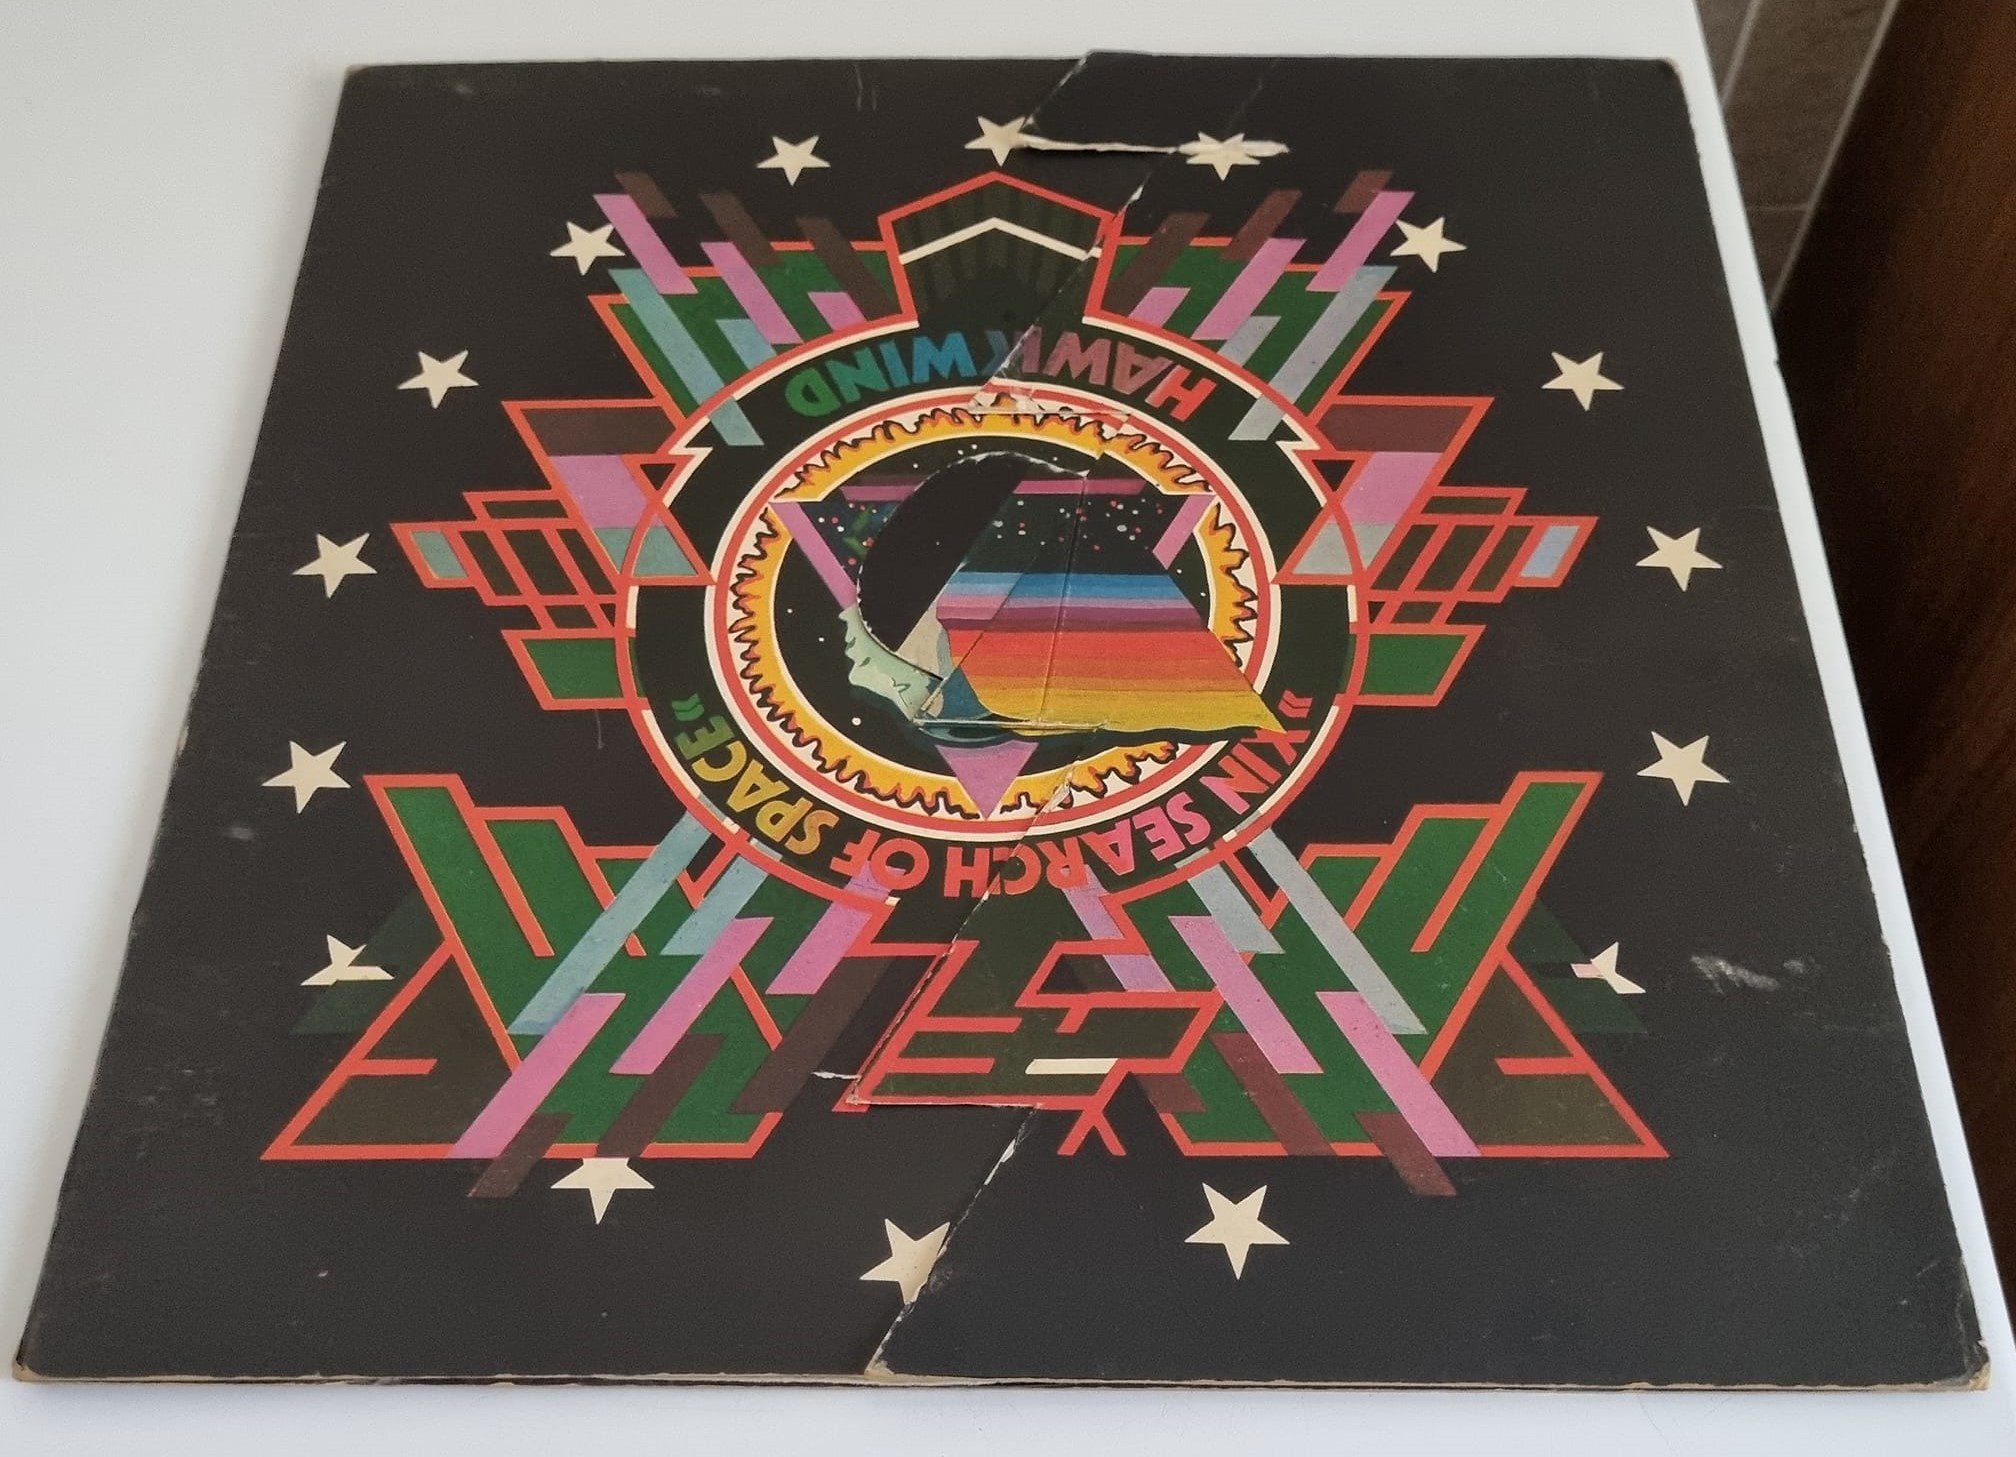 Buy this rare Hawkwind record by clicking here